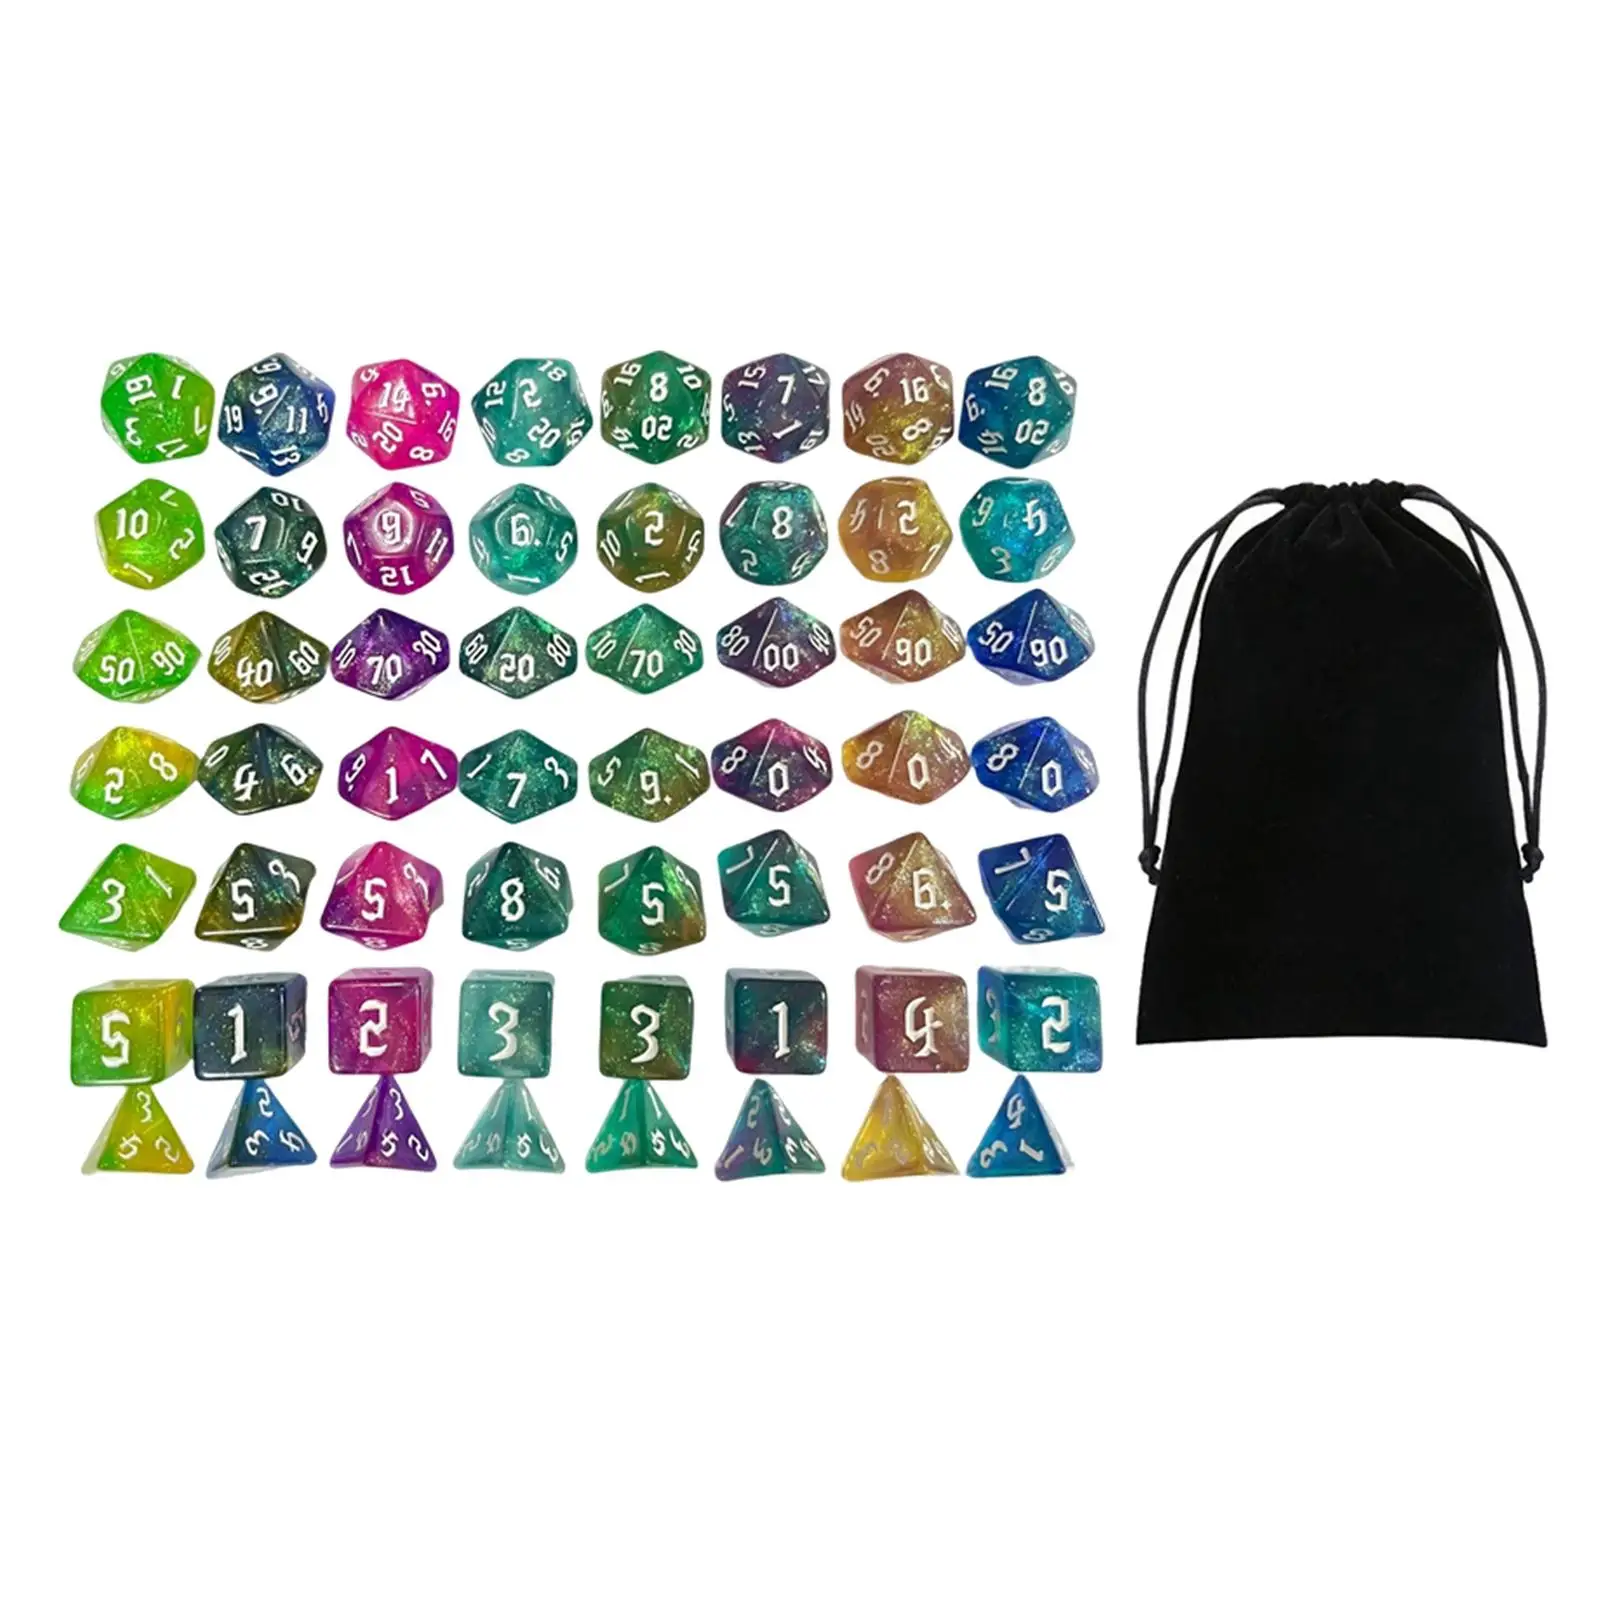 56 Pieces Polyhedral Dices Set Toys Bicolor for Board Game Props Parties KTV